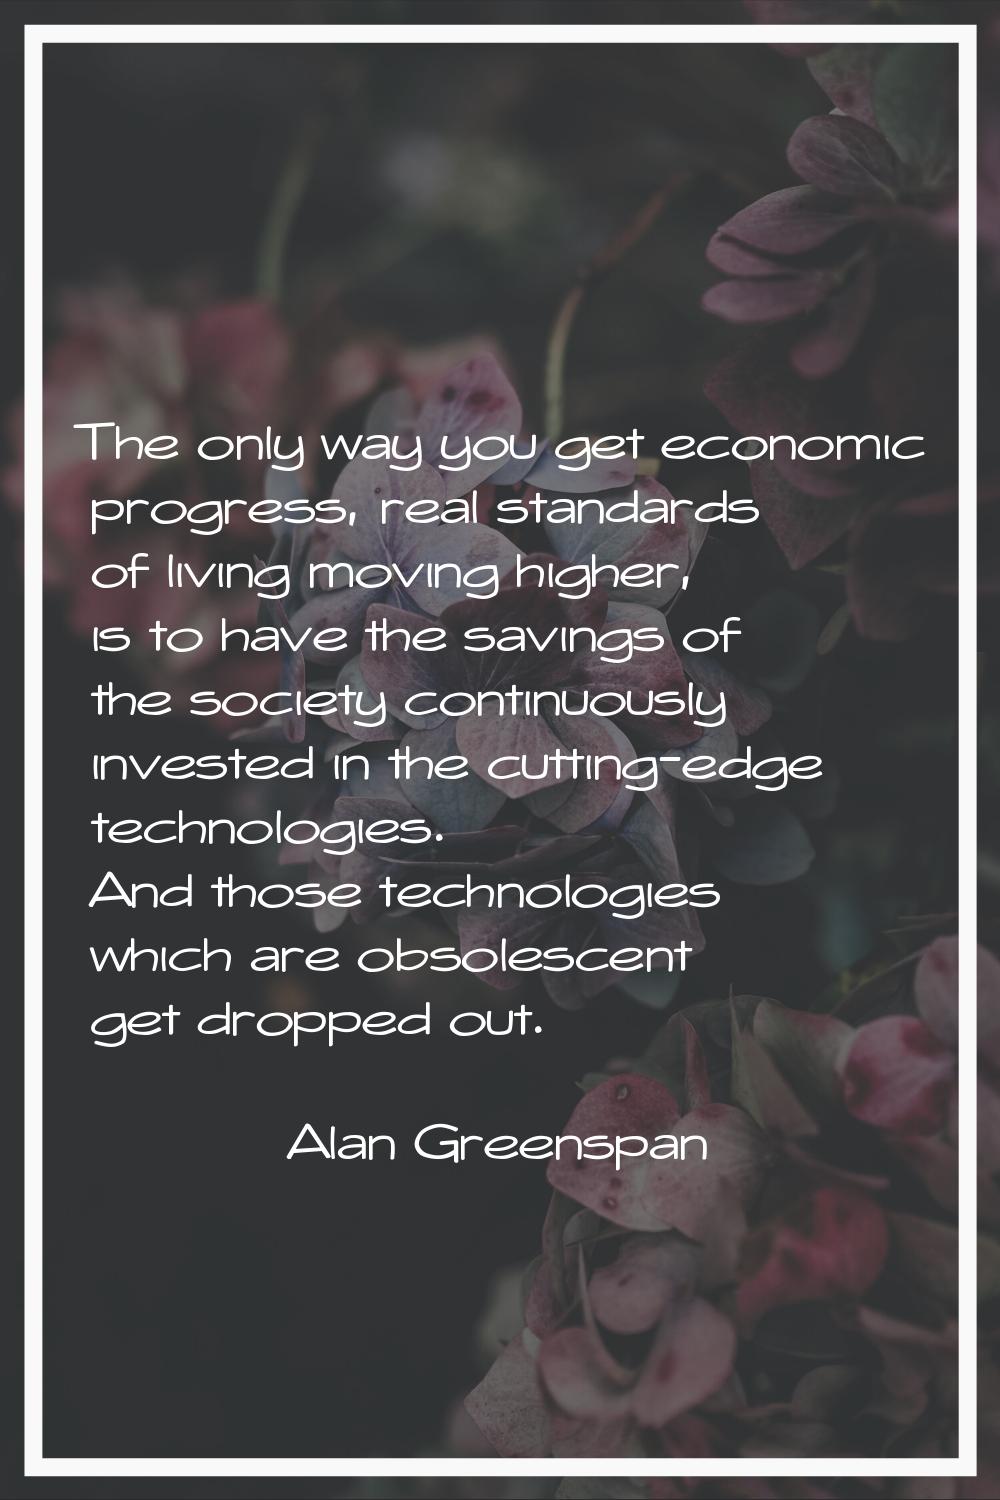 The only way you get economic progress, real standards of living moving higher, is to have the savi